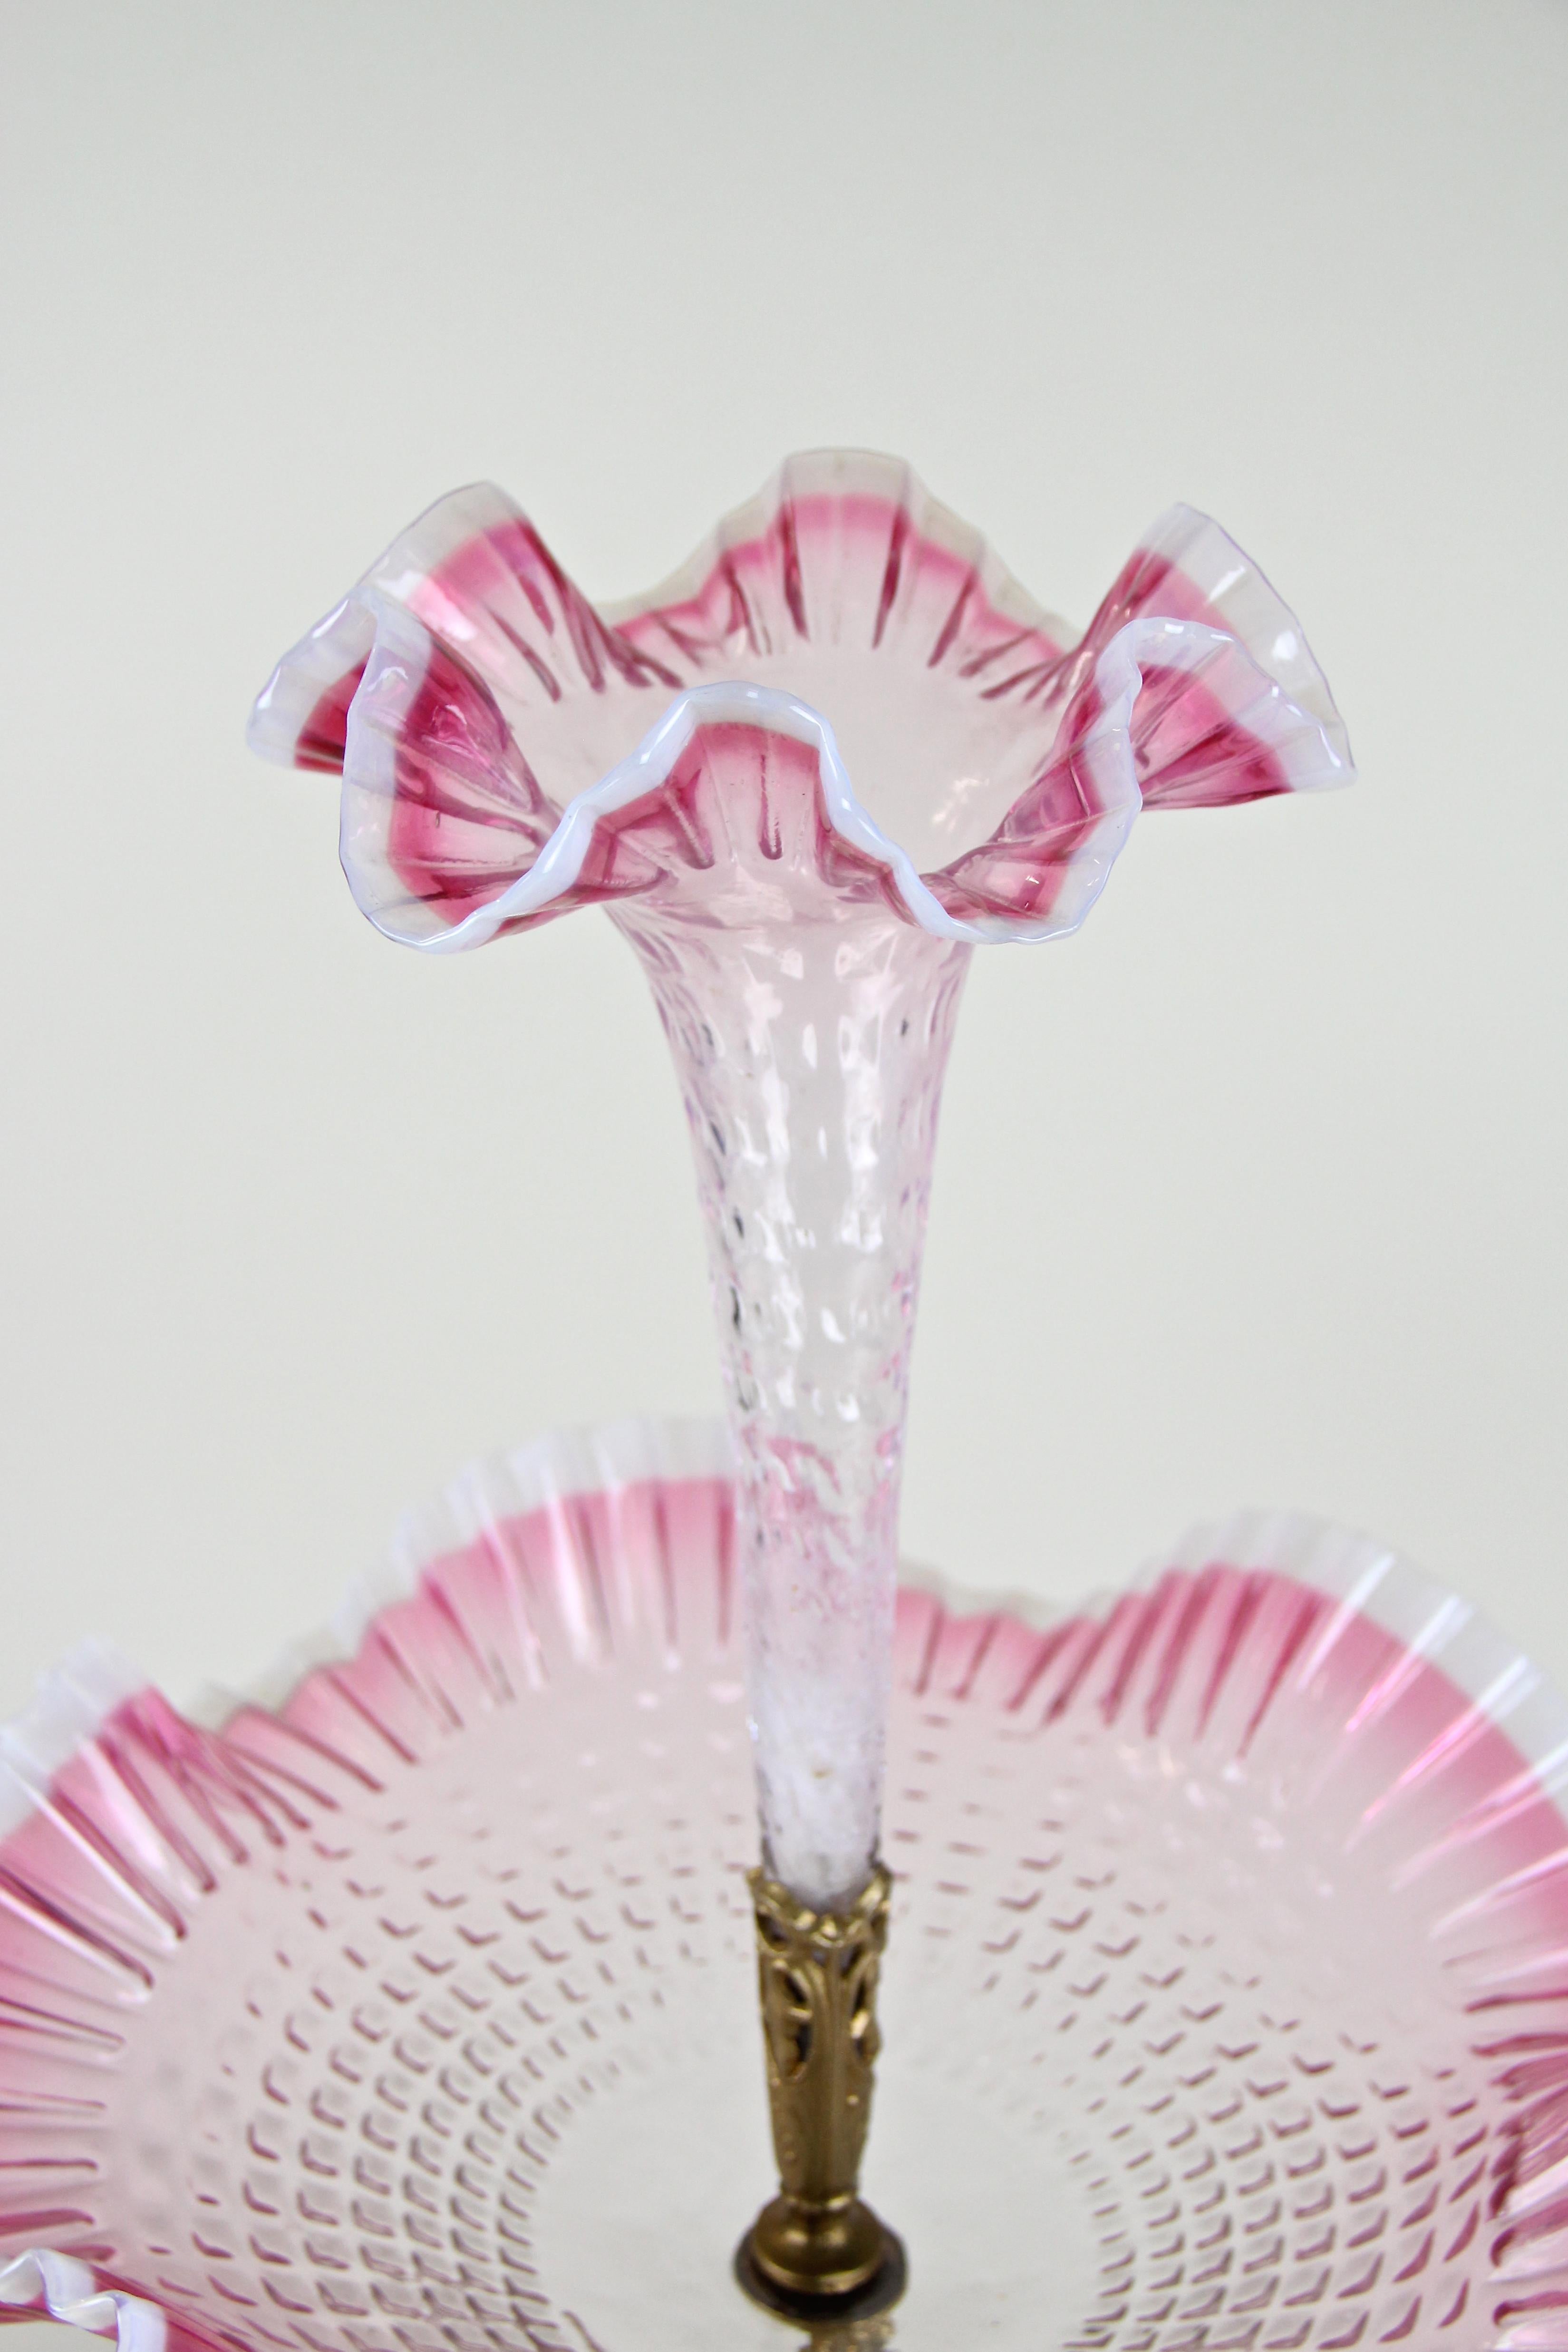 20th Century Art Nouveau Centerpiece with Stag Frilly Glass Bowl or Vase, Austria, circa 1900